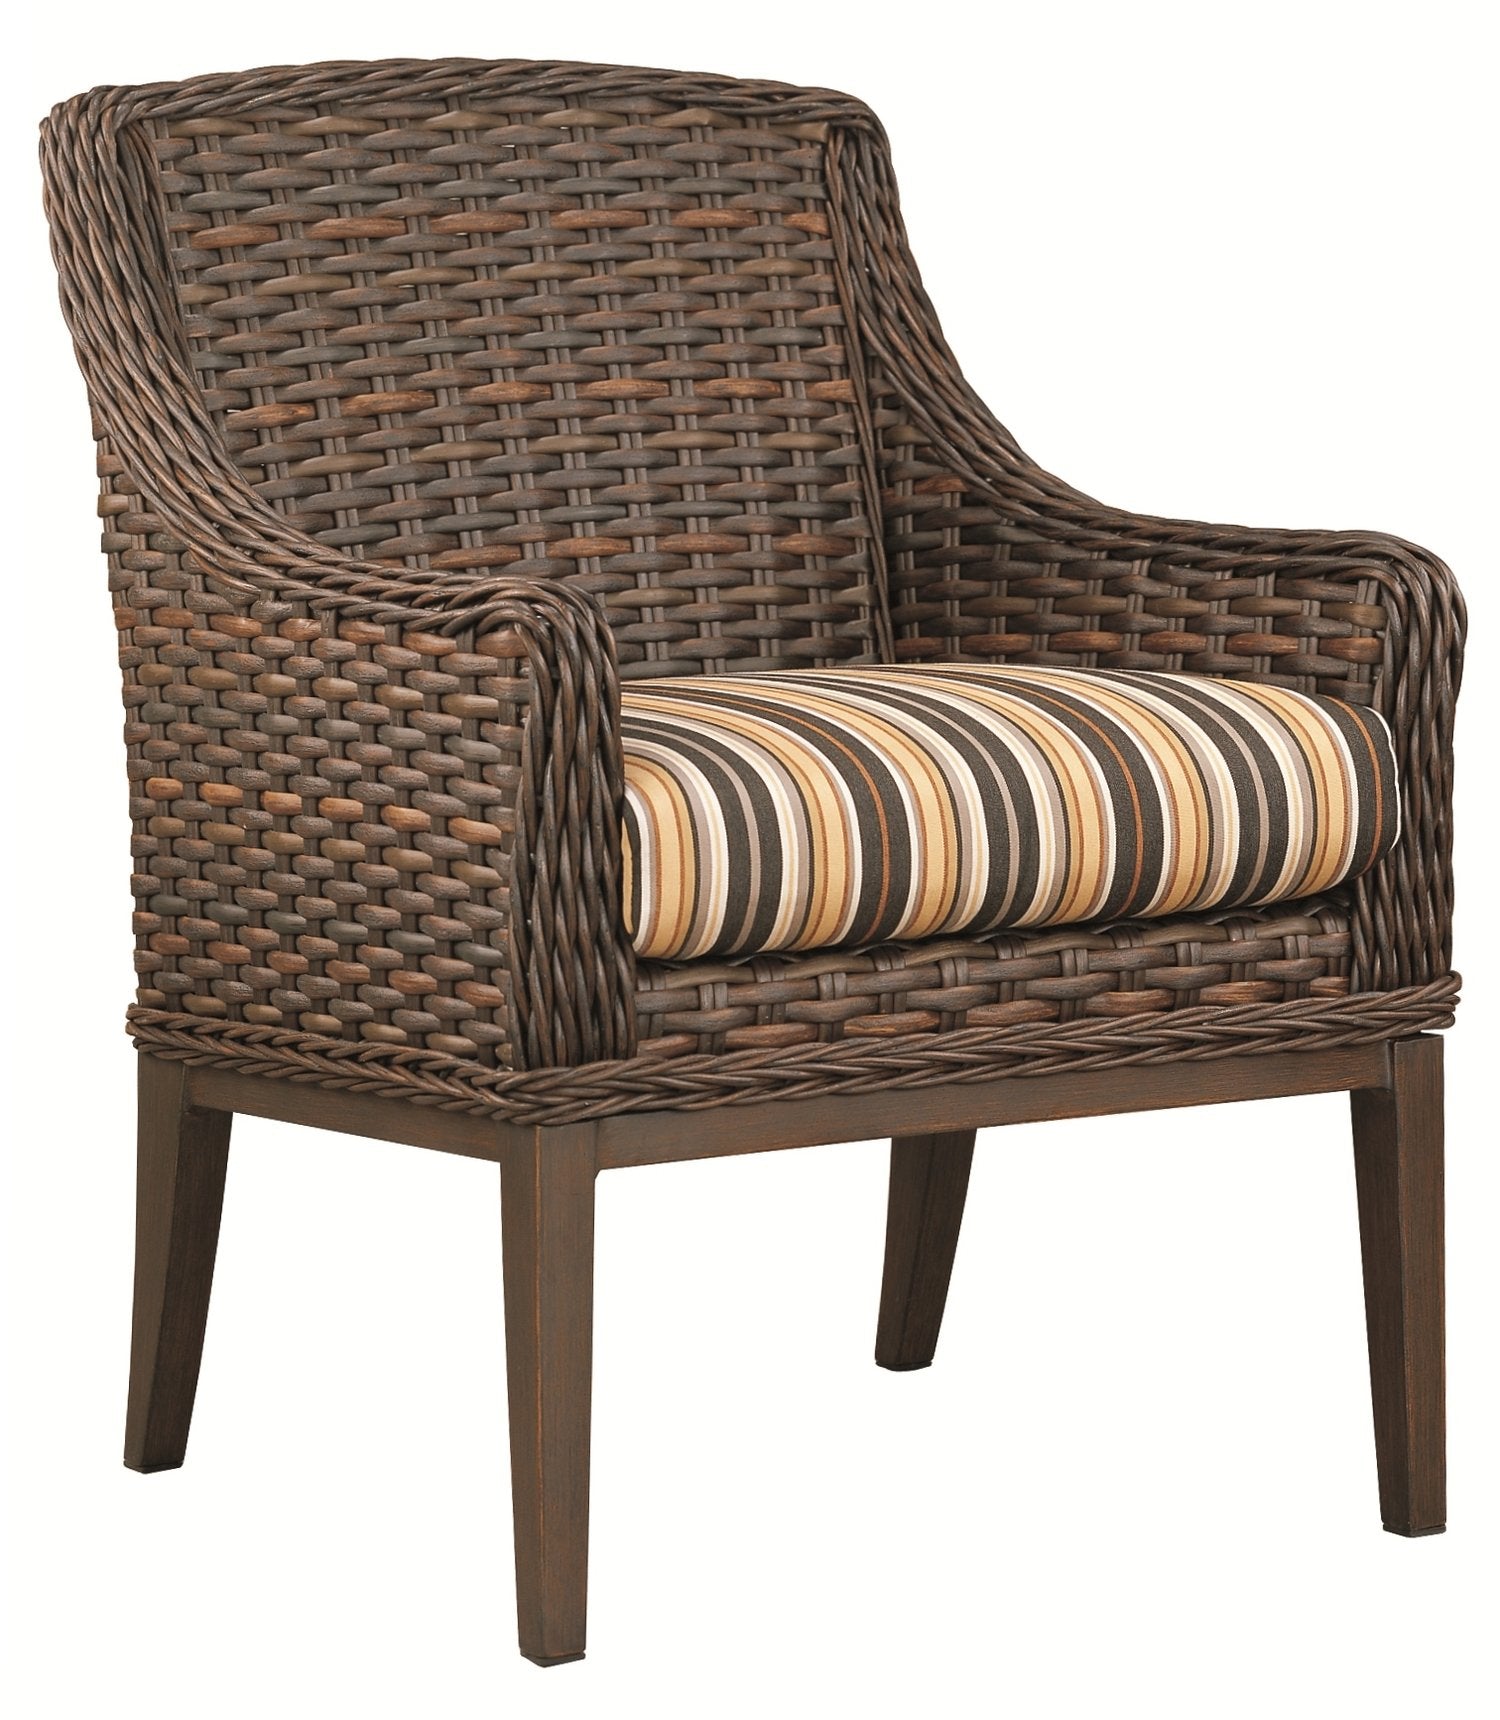 Catalina Dining Chair by Patio Renaissance